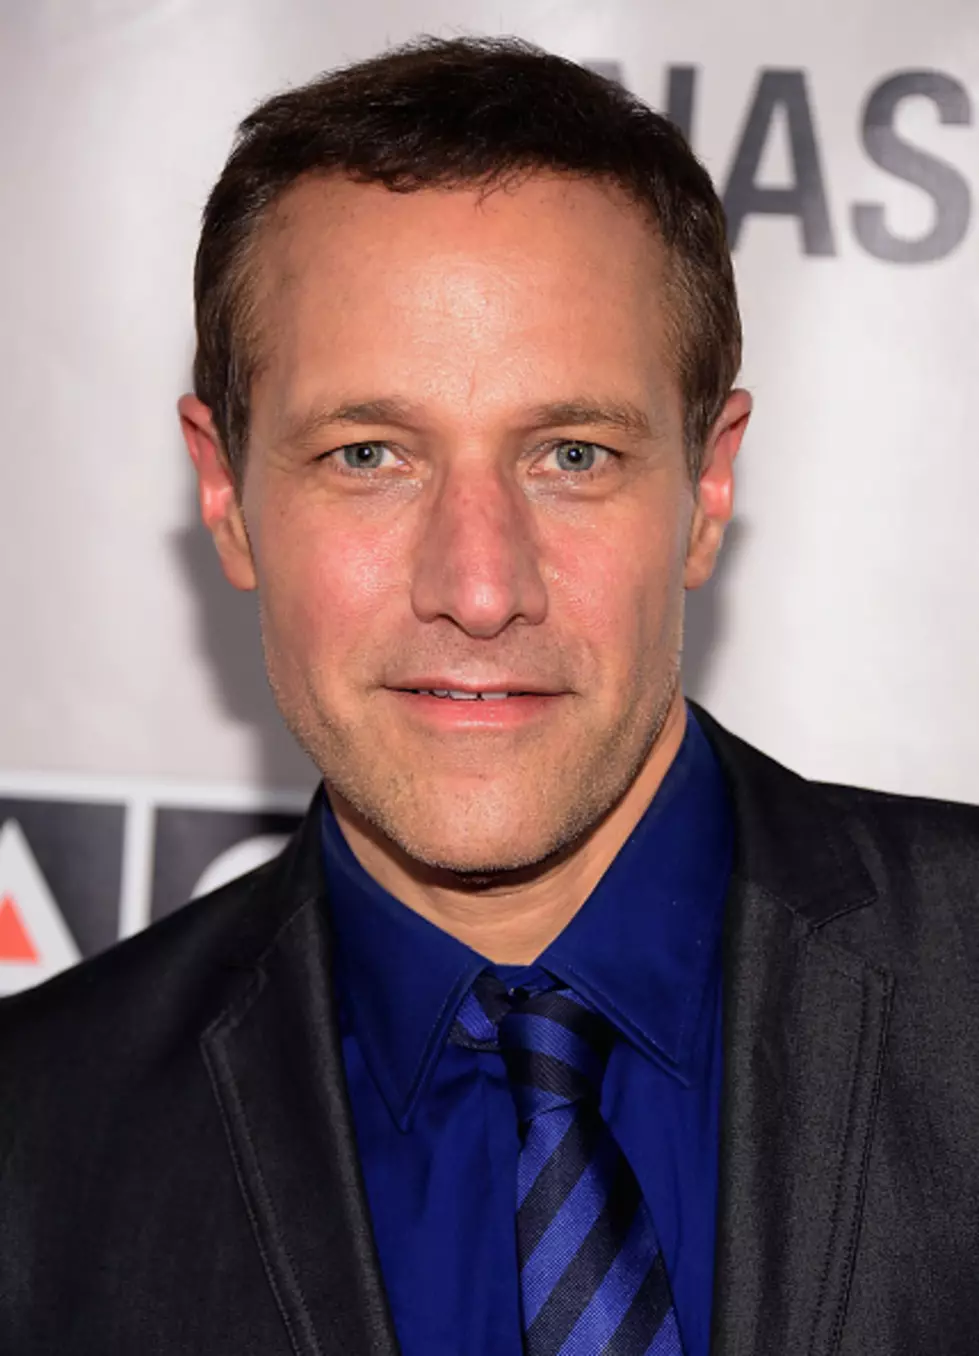 Jim Brickman is Touring Again But it May Surprise You Where He’s Headed [Interview]